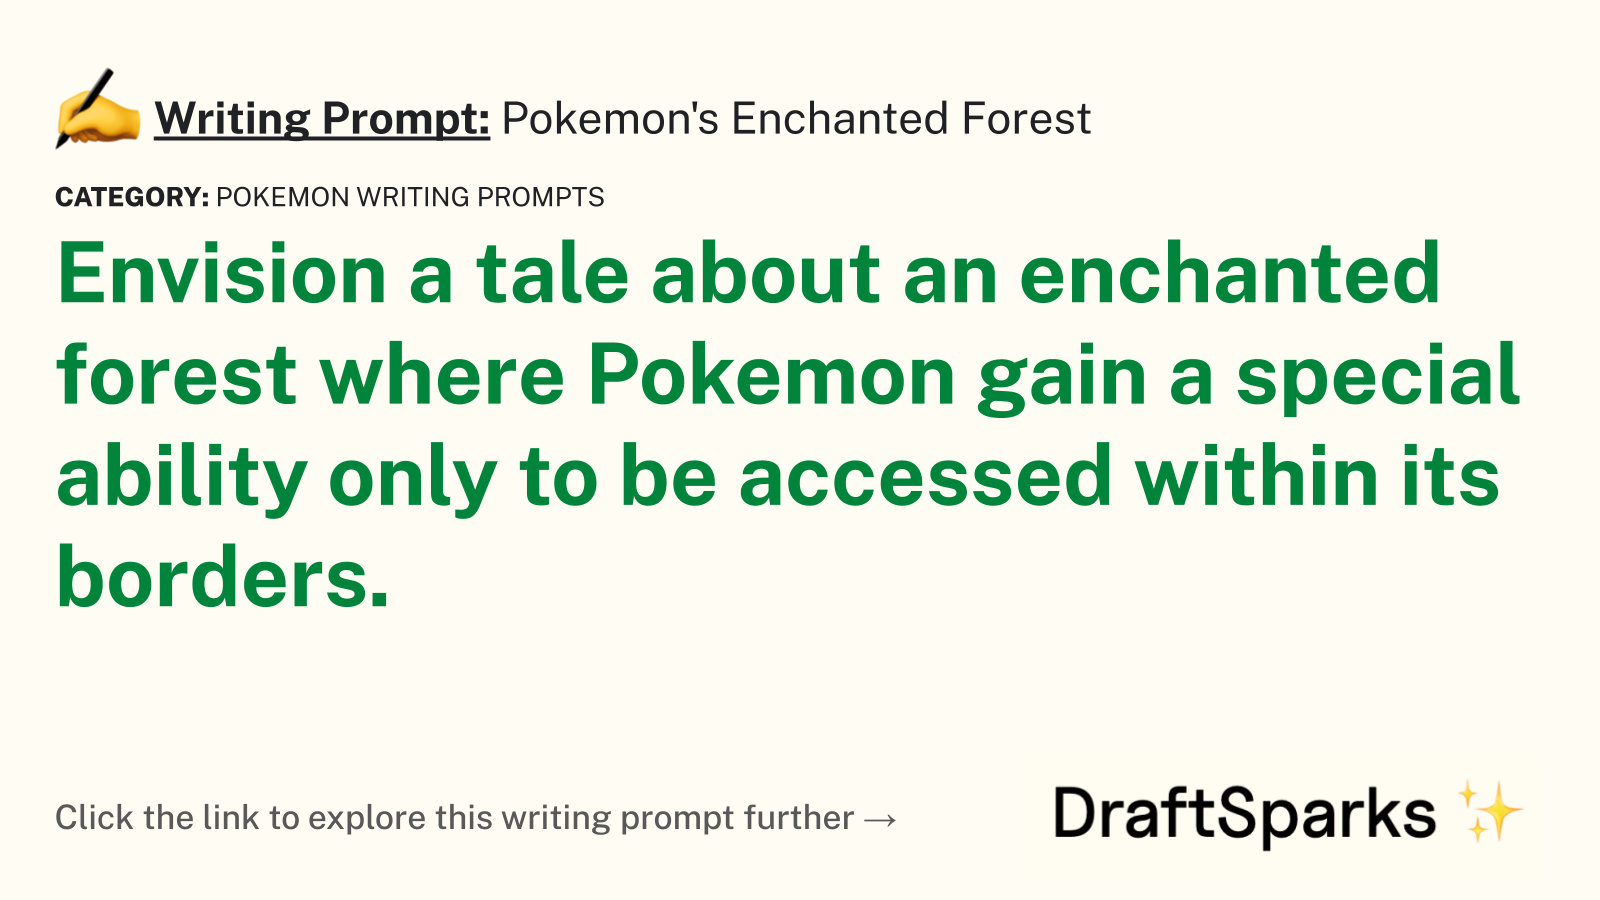 Pokemon’s Enchanted Forest